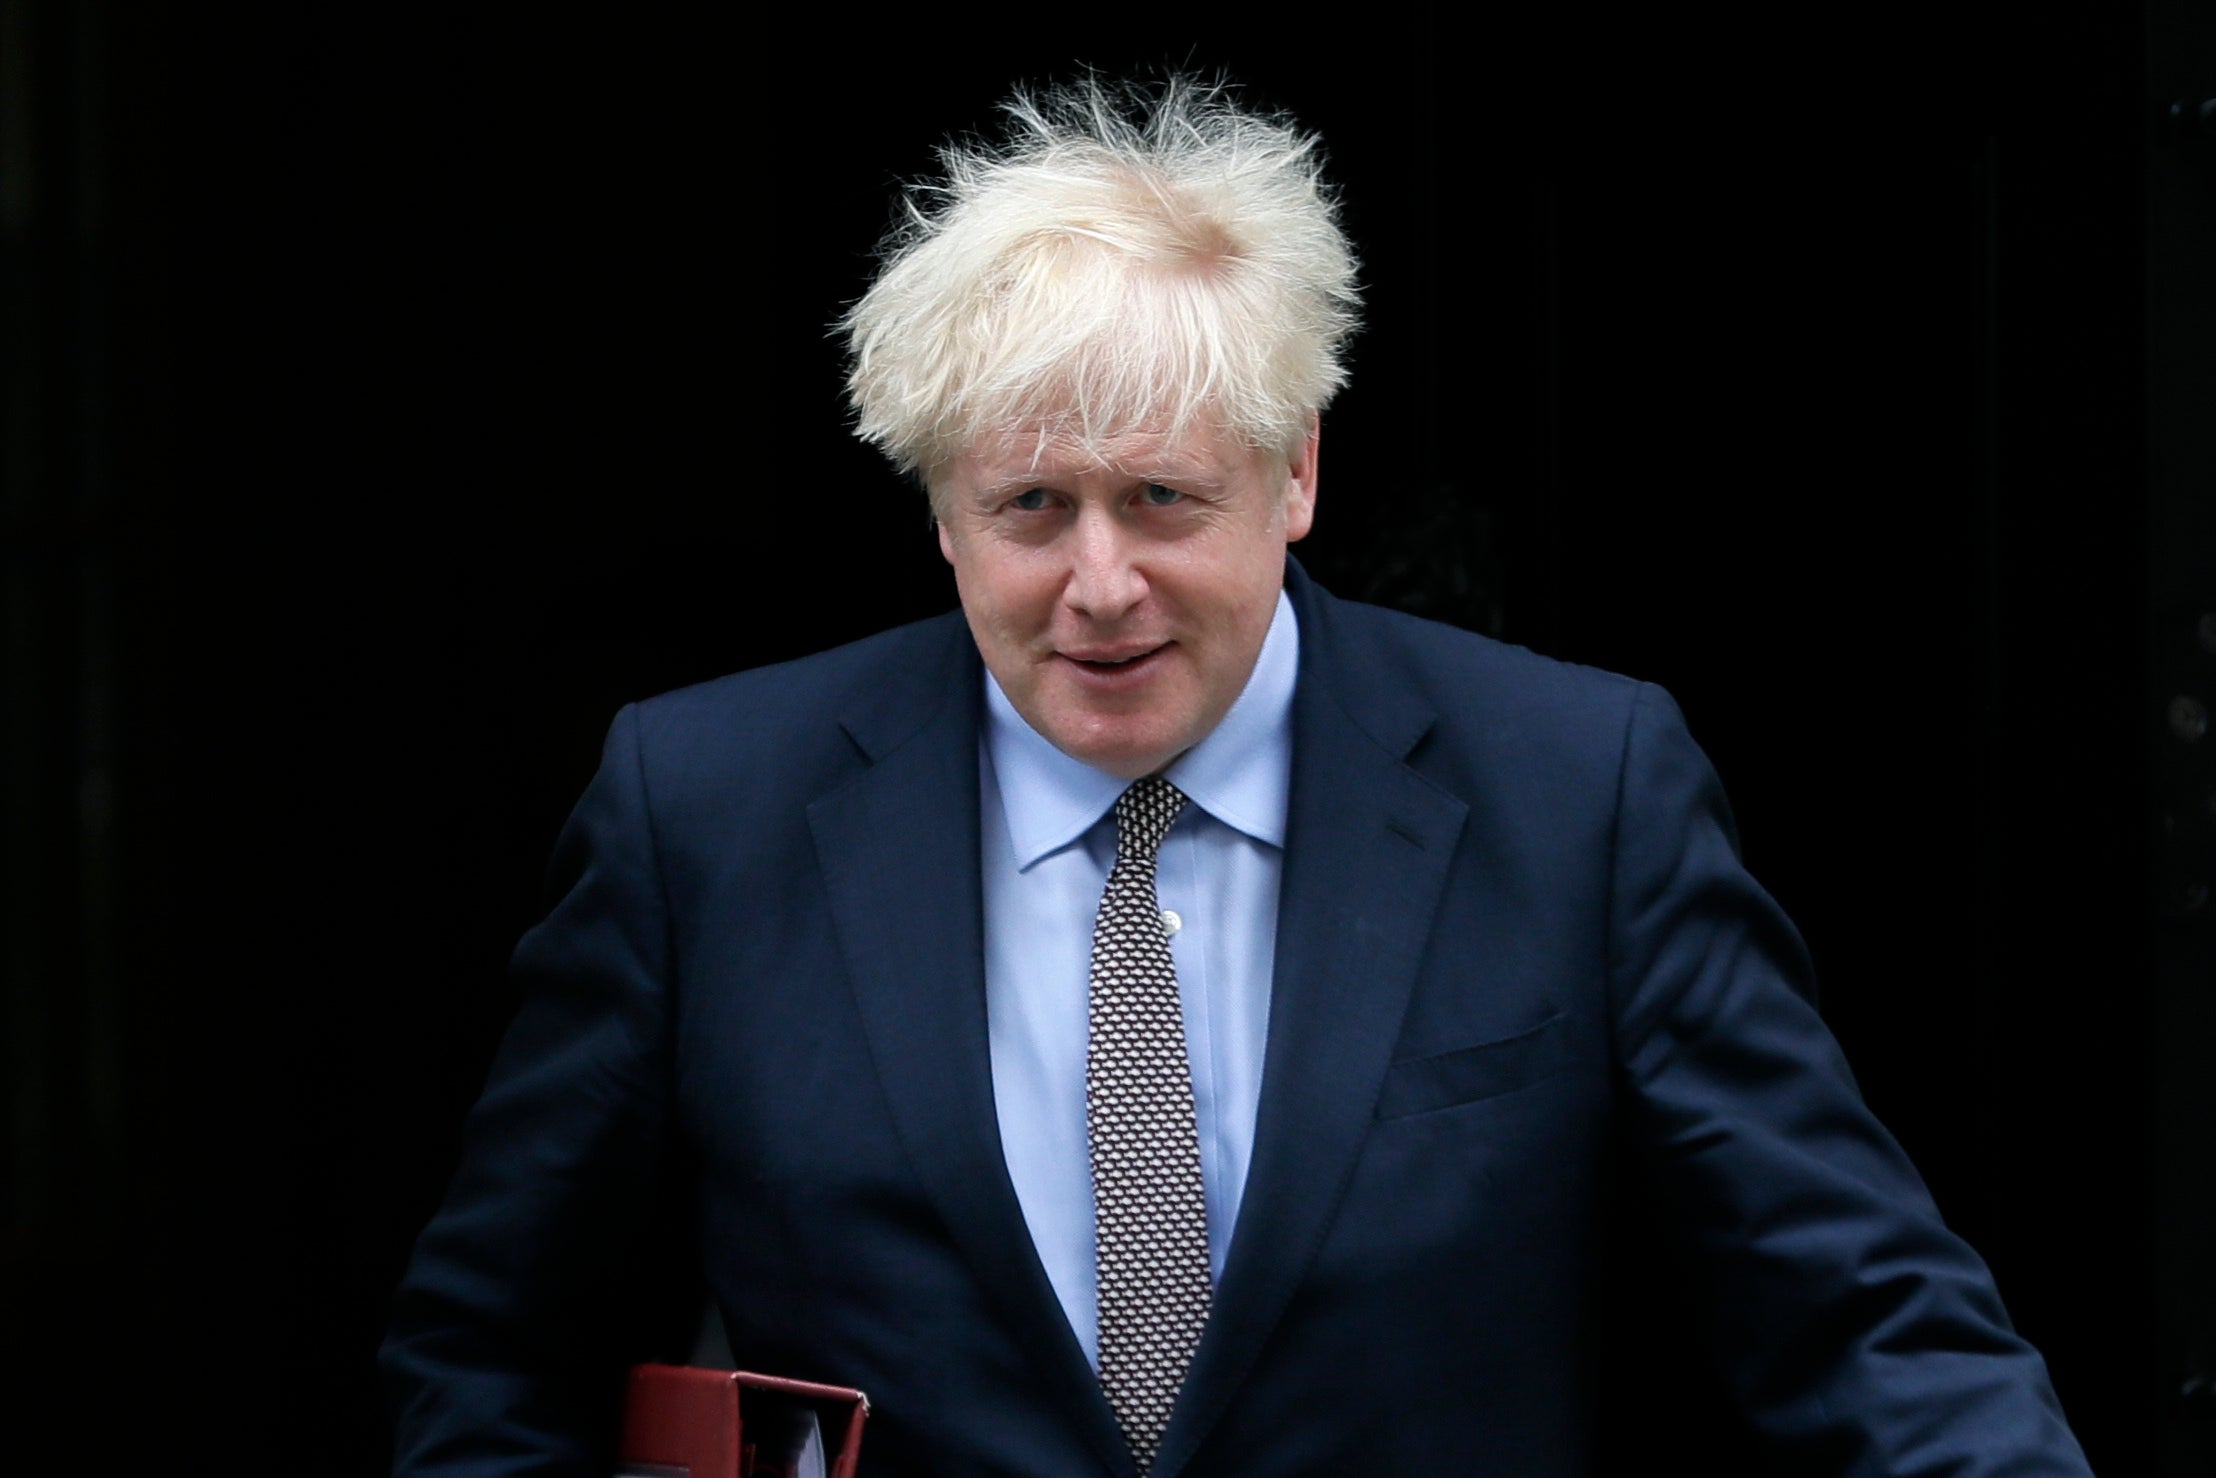 Boris Johnson ‘plans to opt out of human rights laws’ amid Brexit row